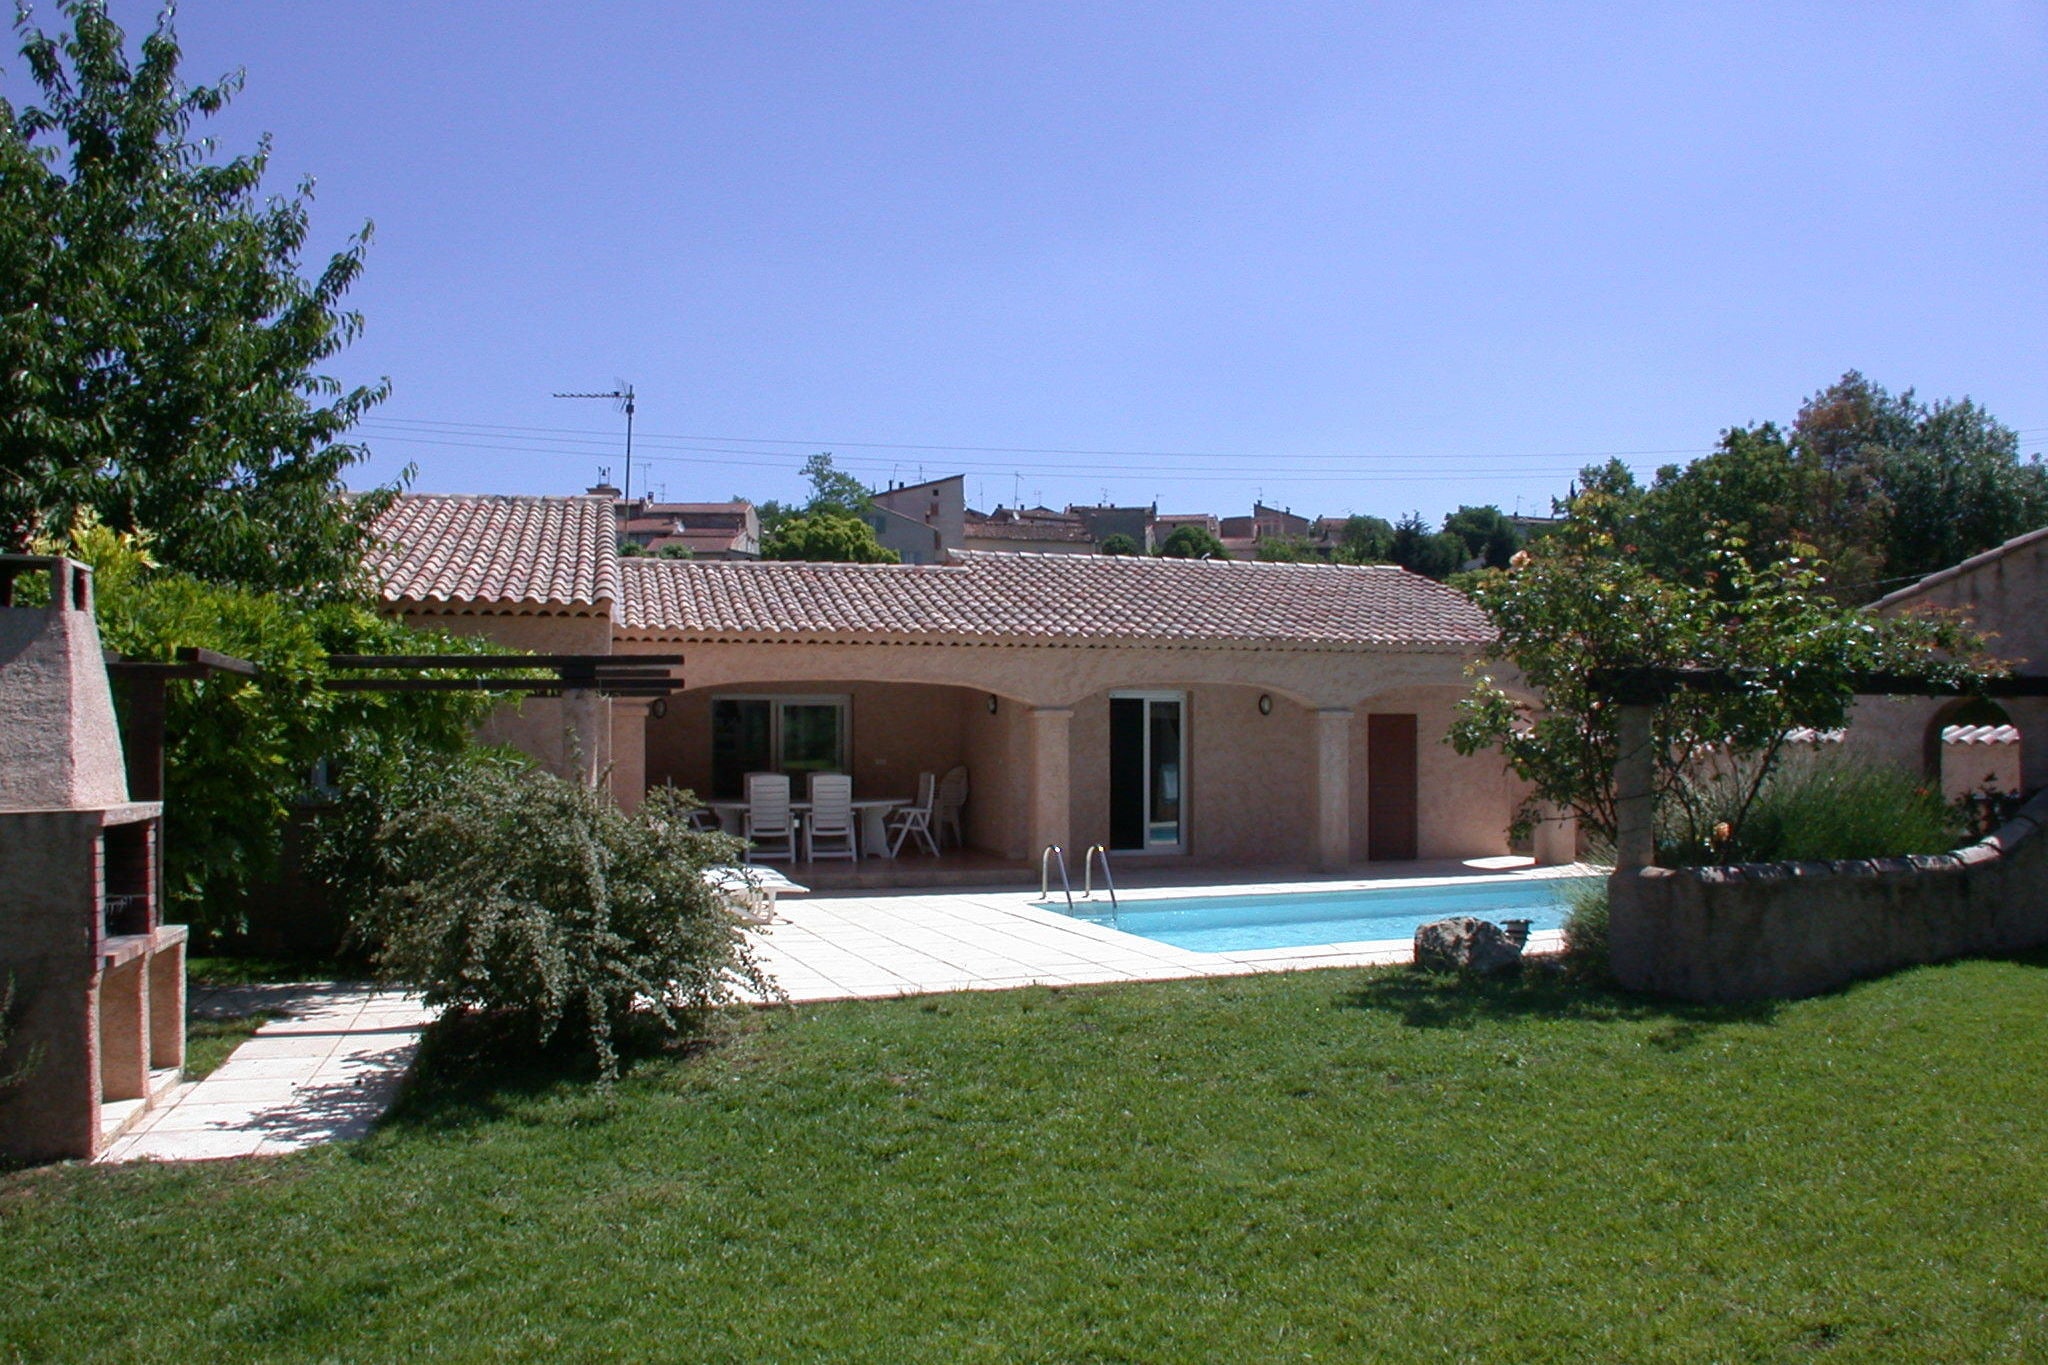 Villa with air conditioning and private pool 1 km from Saint-Paul-en-Foret and 35 km from the sea